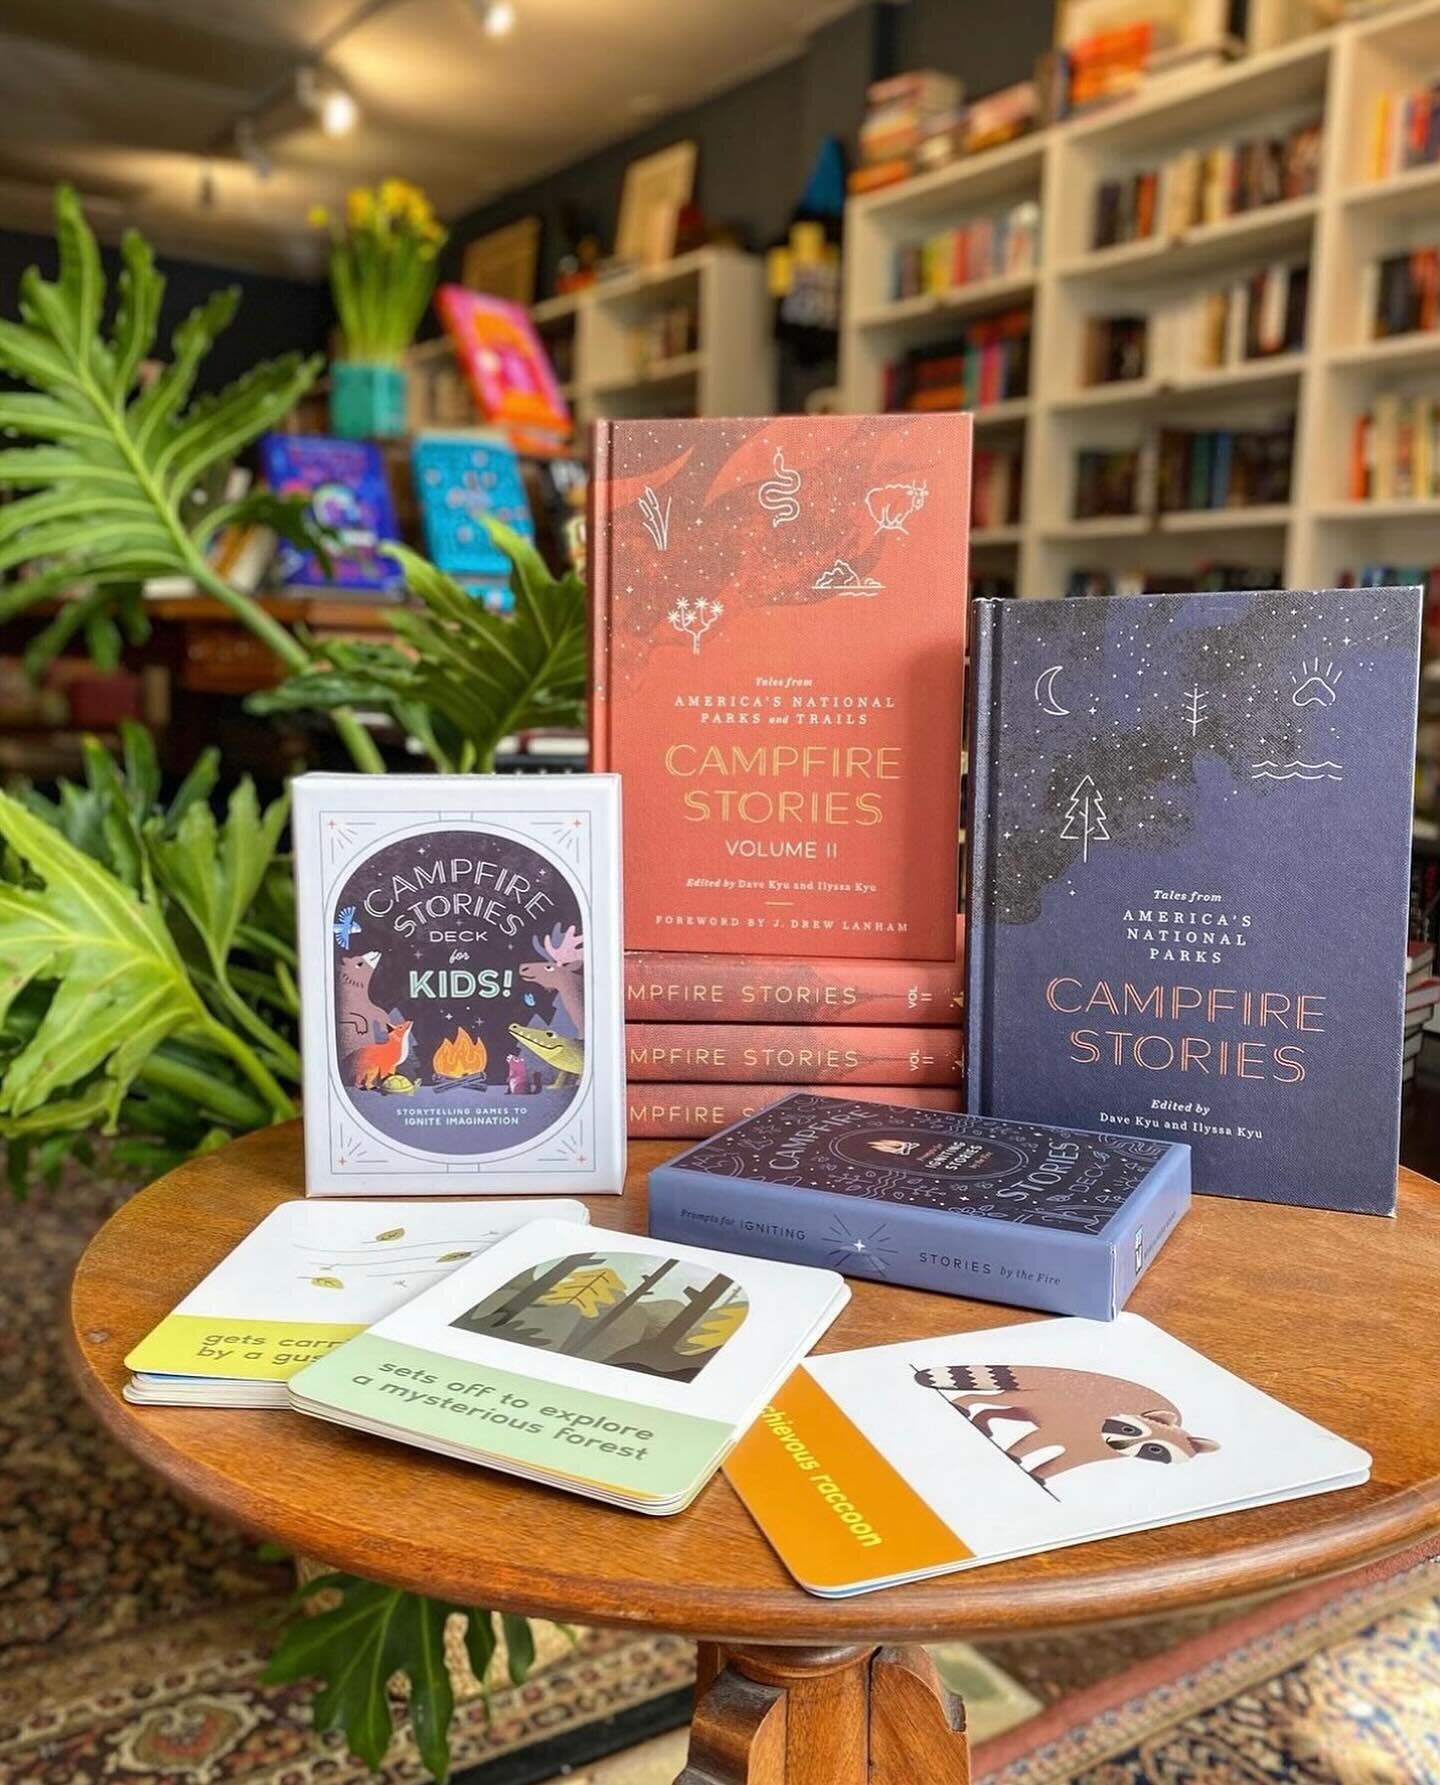 The whoooooole shebang at @capricornbookshop ✨📖 

Excited to hear some wild stories from the creative minds of young storytellers tomorrow, Sat 3/16 at 11am using our Campfire Stories card deck for kids 🐅🐾🌿 We&rsquo;ll also be sharing some storie